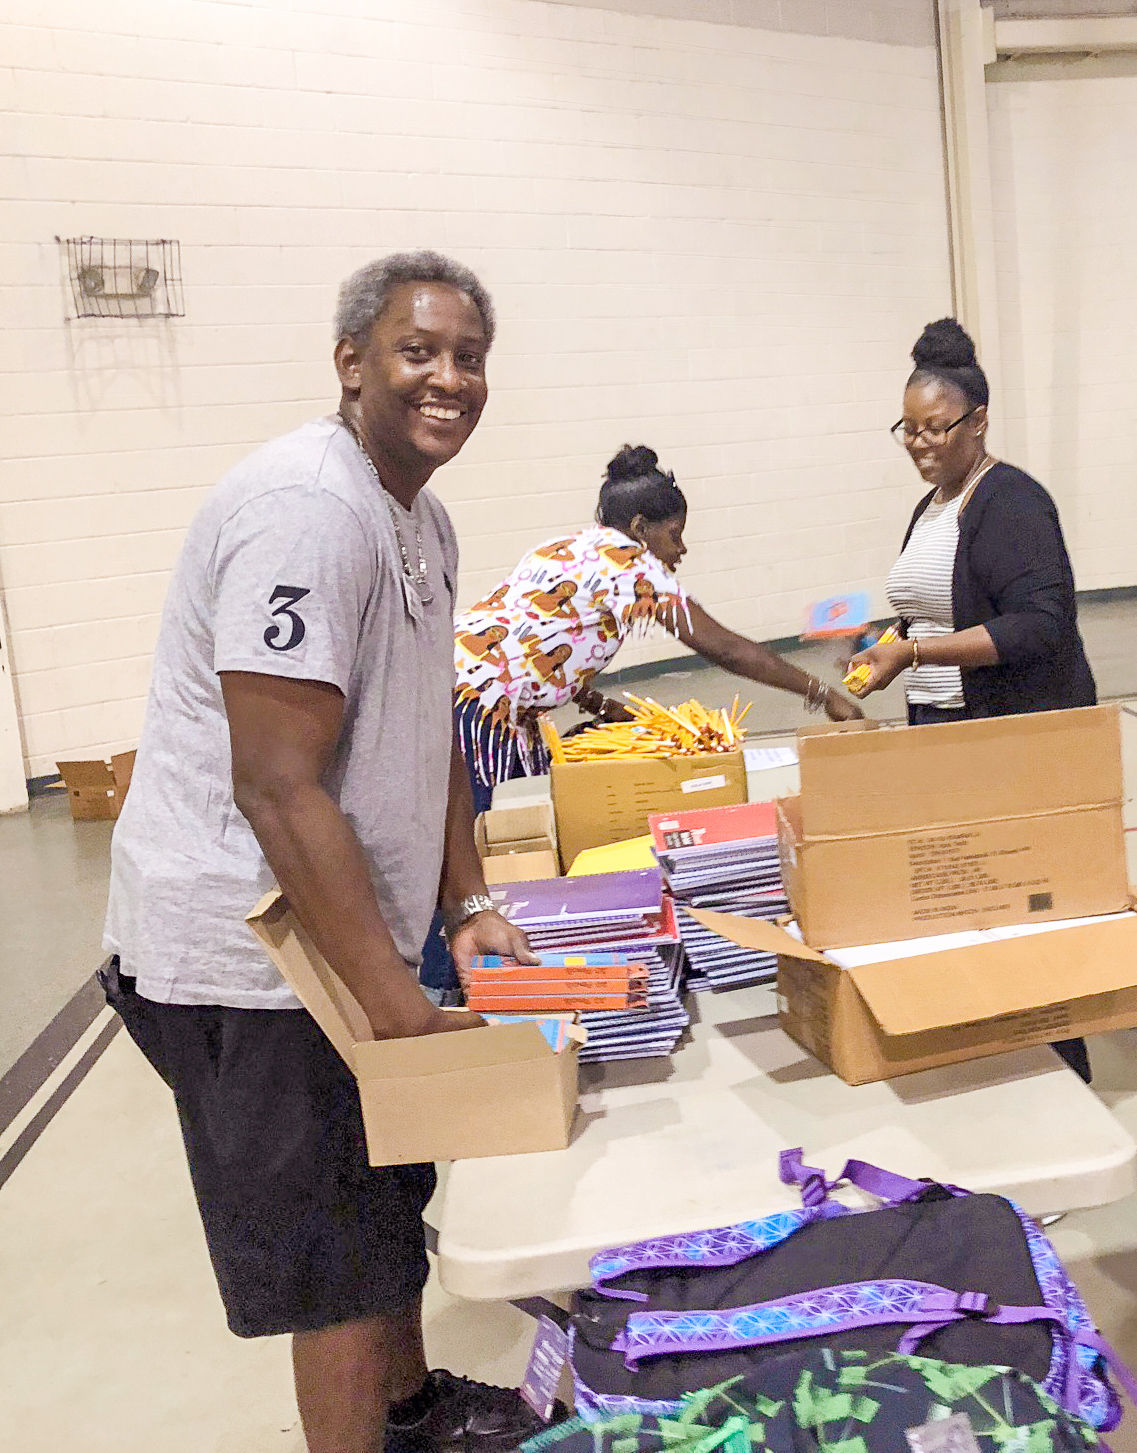 NJ Alumni & Staff Pack School Supplies for Families in Need